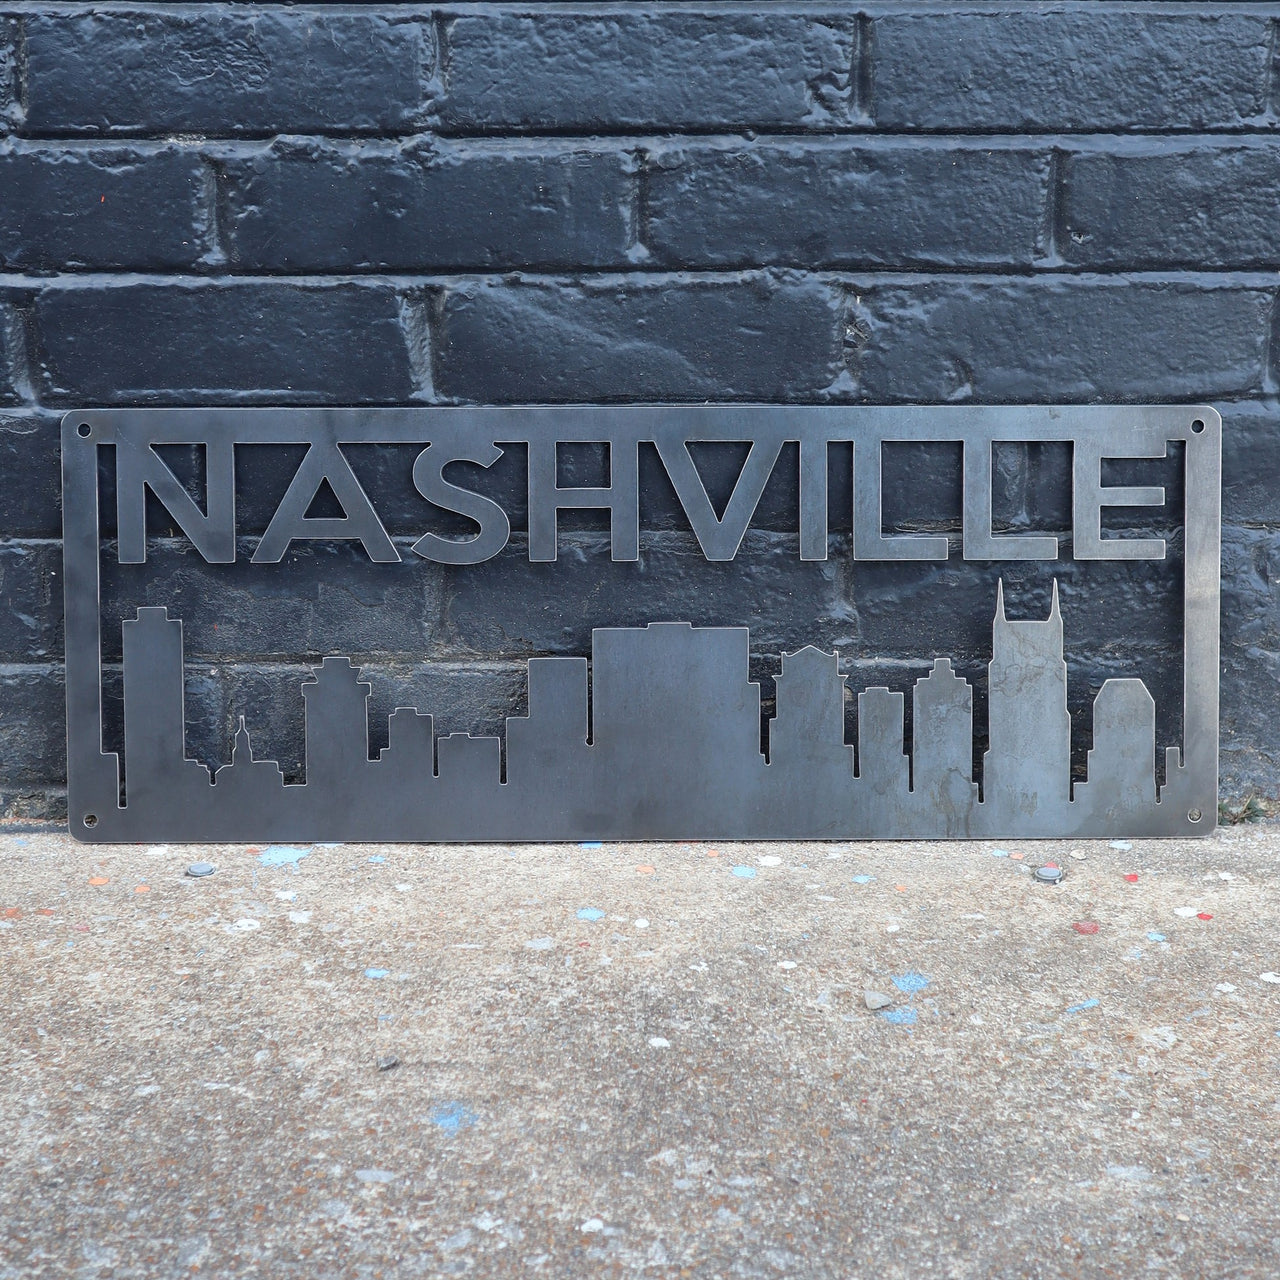 Personalized Metal Nashville Skyline Sign - Nashville, Tennessee Wall Art - Music City Skyline Personalized Home Decor